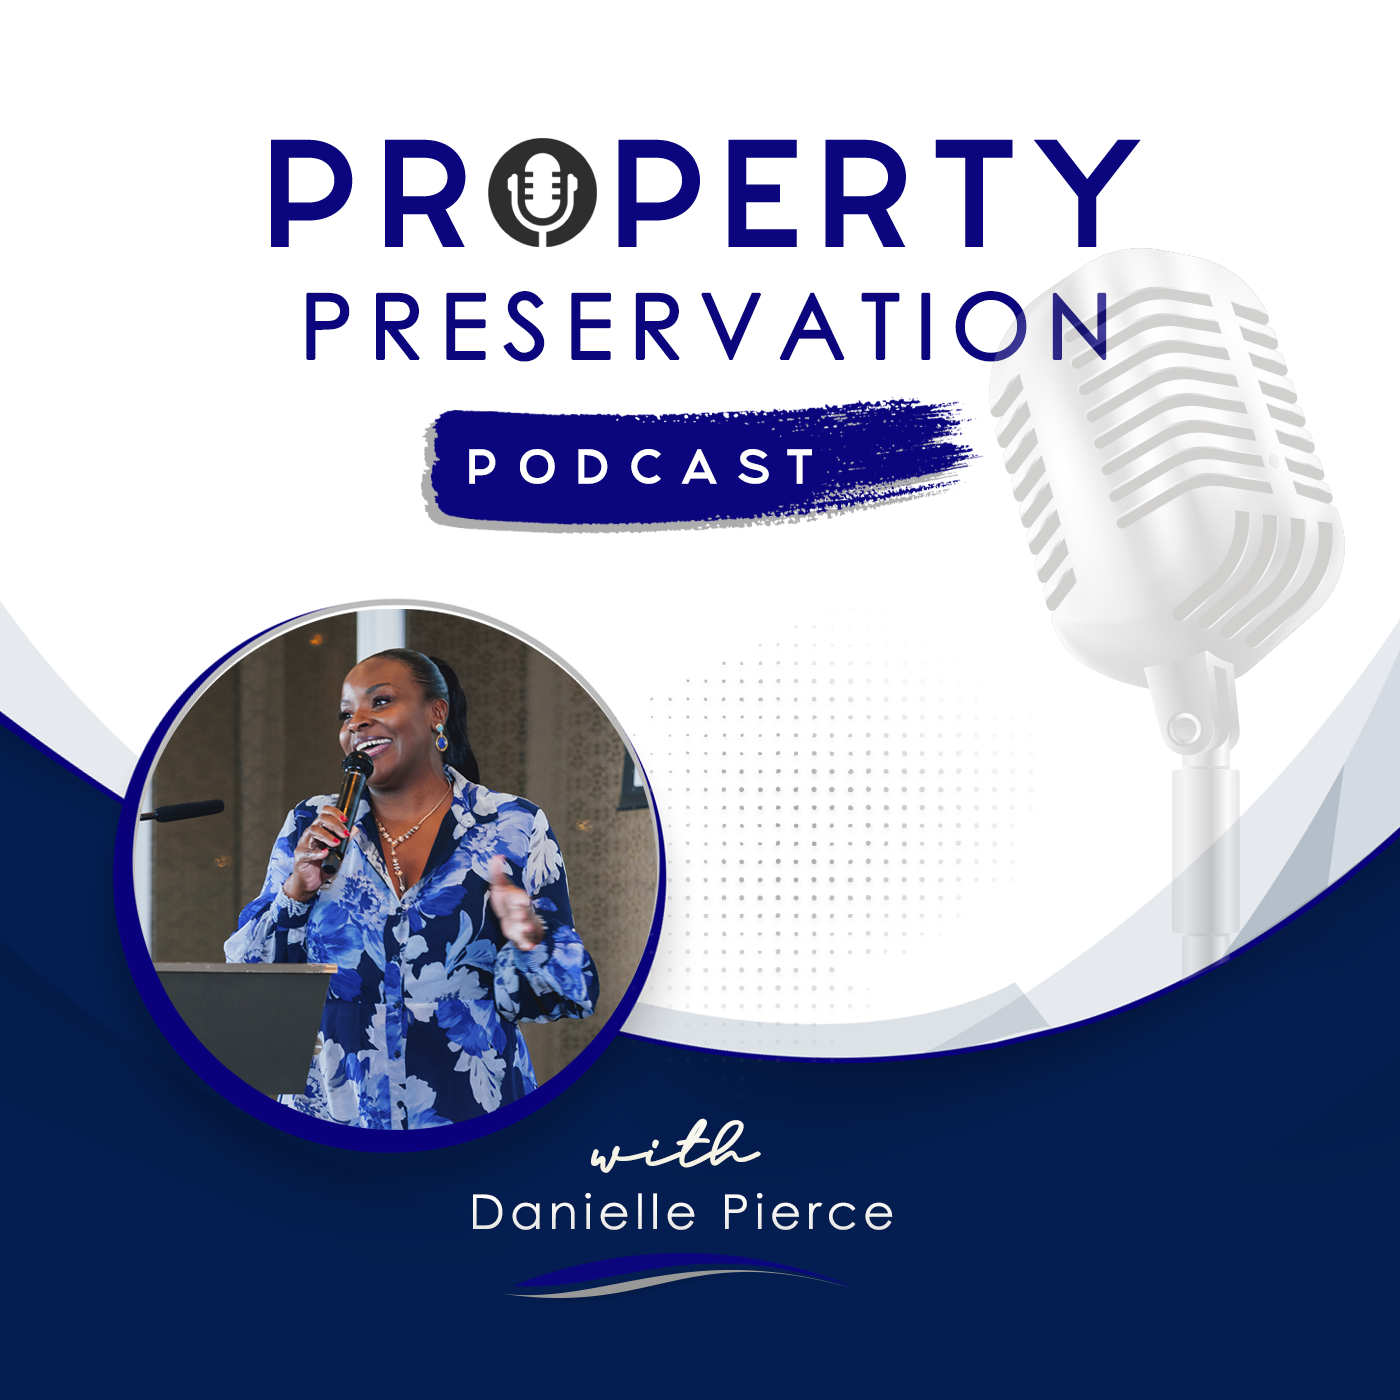 BONUS EPISODE 1: 40 Million Evictions On The Horizon Due To The Pandemic | Property Preservation Podcast